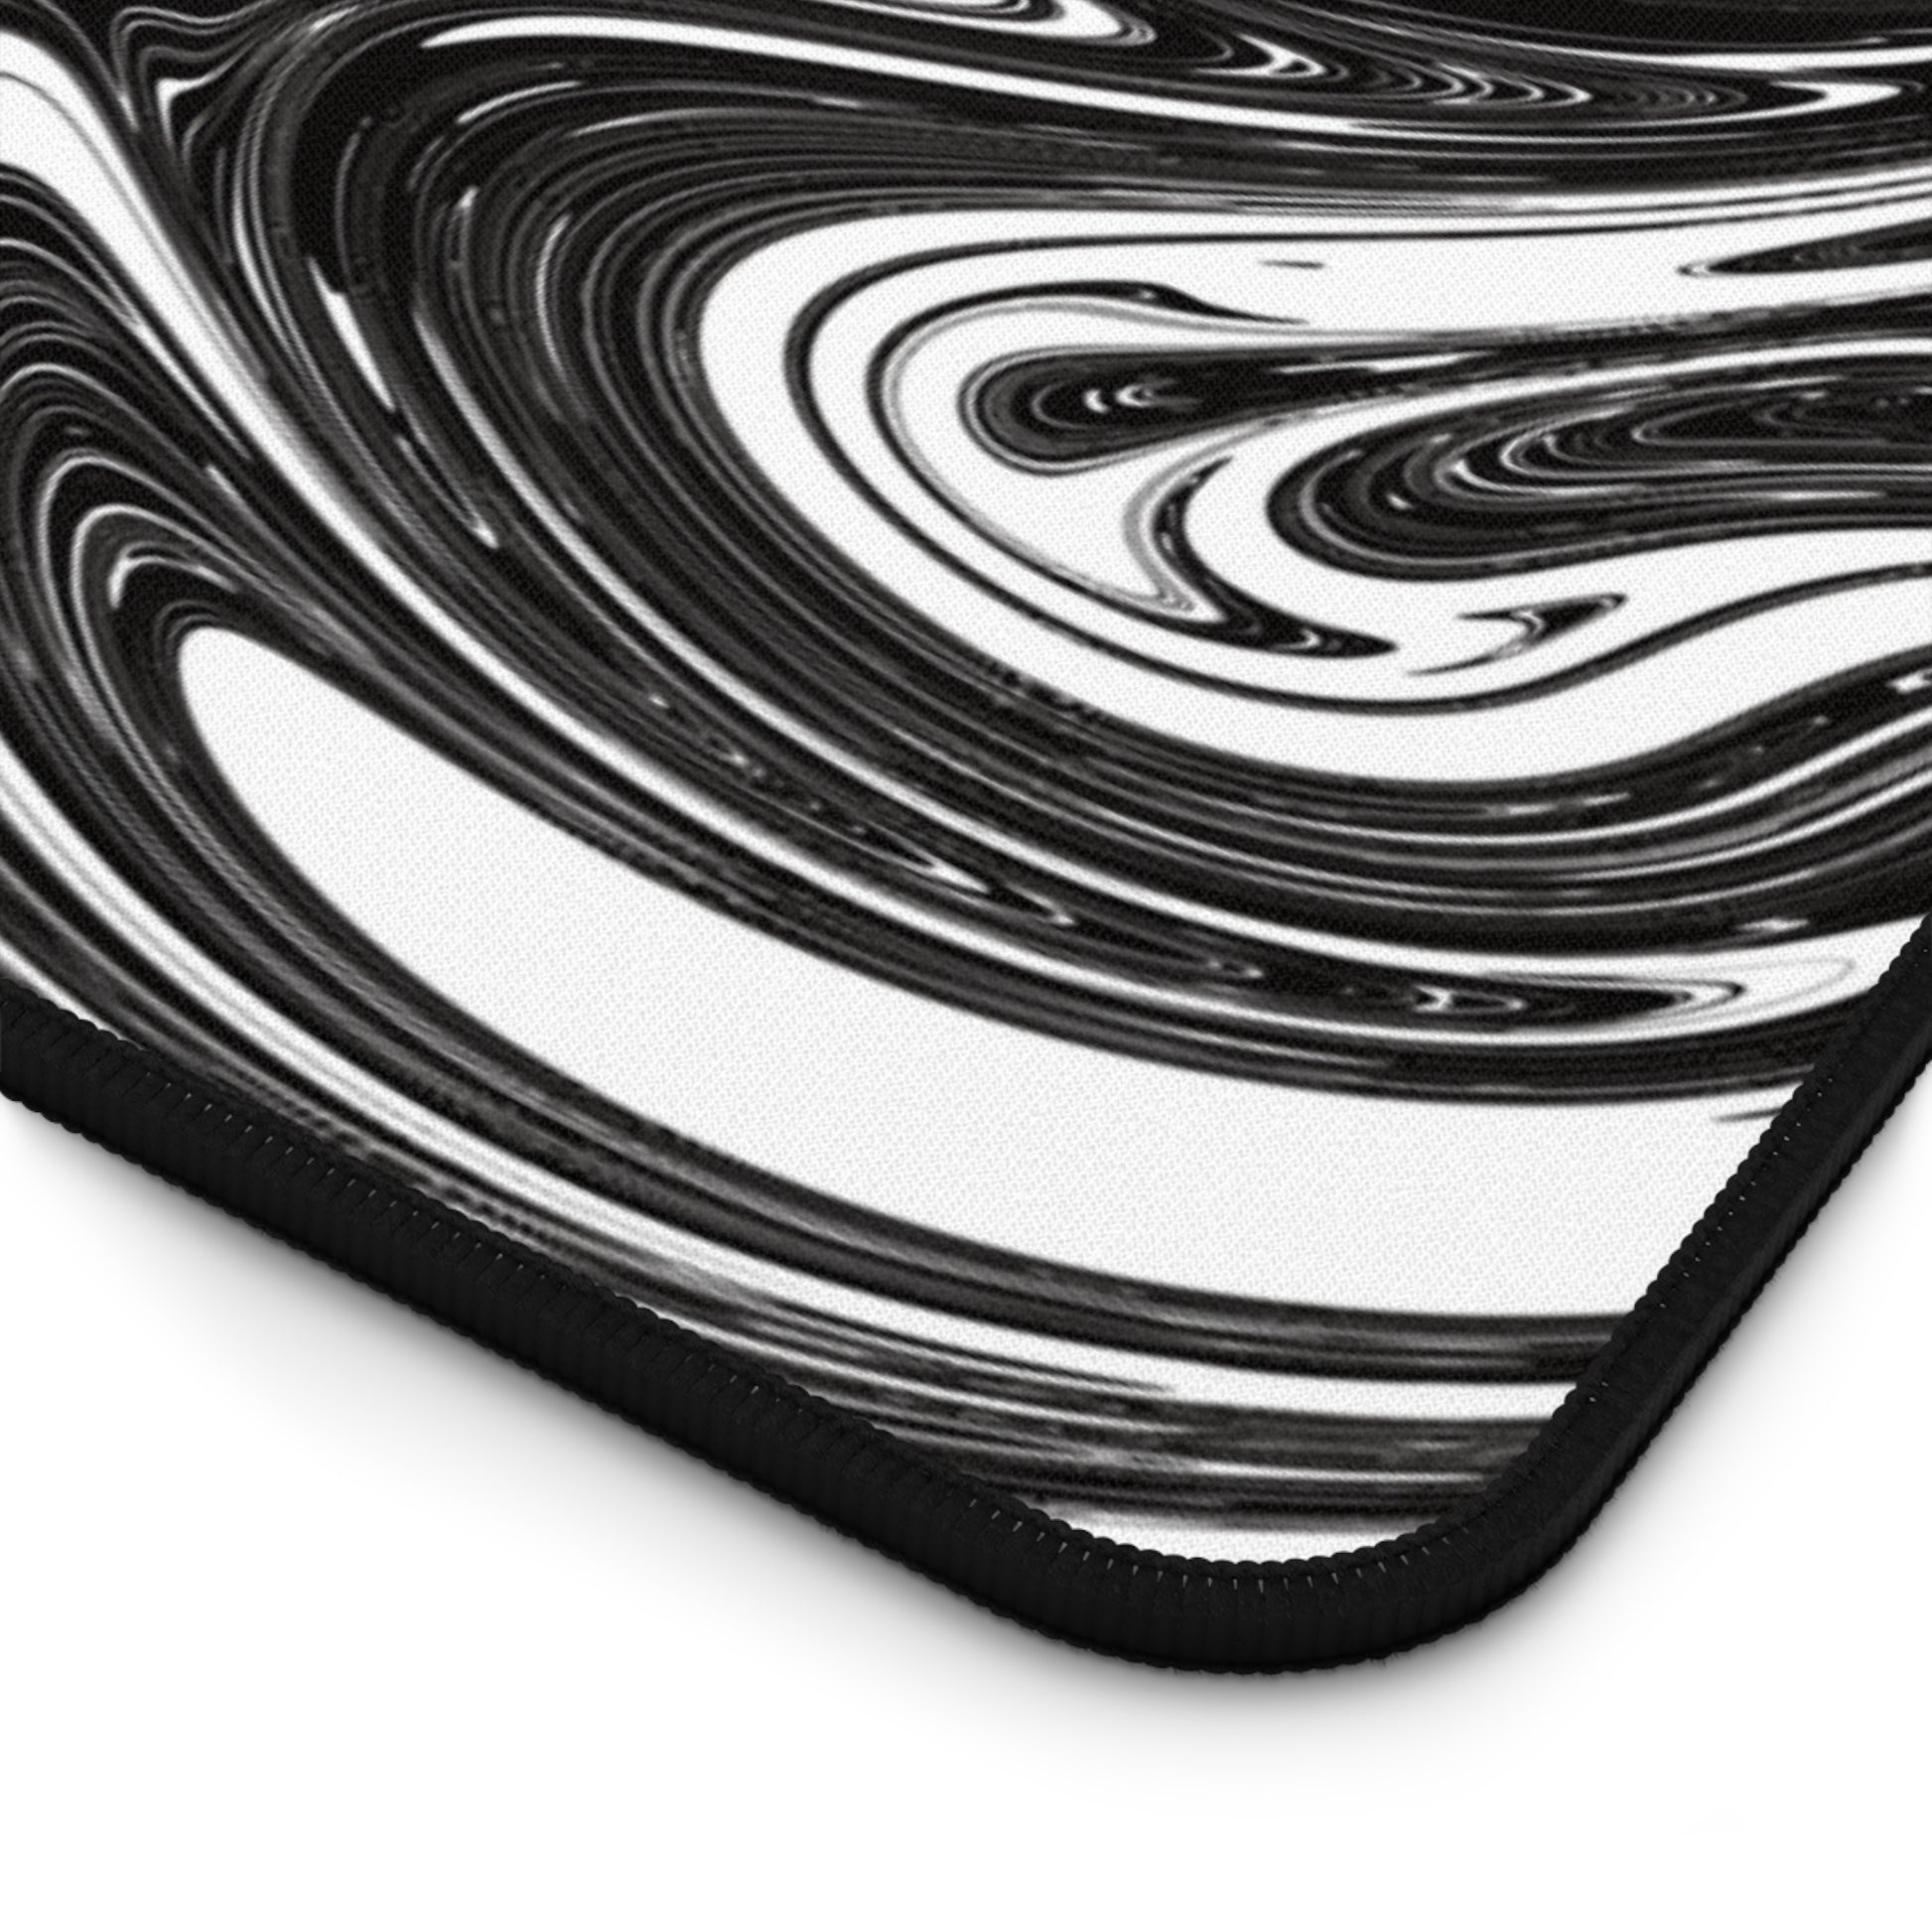 The corner of a 31" x 15.5" desk mat with black and white swirls.